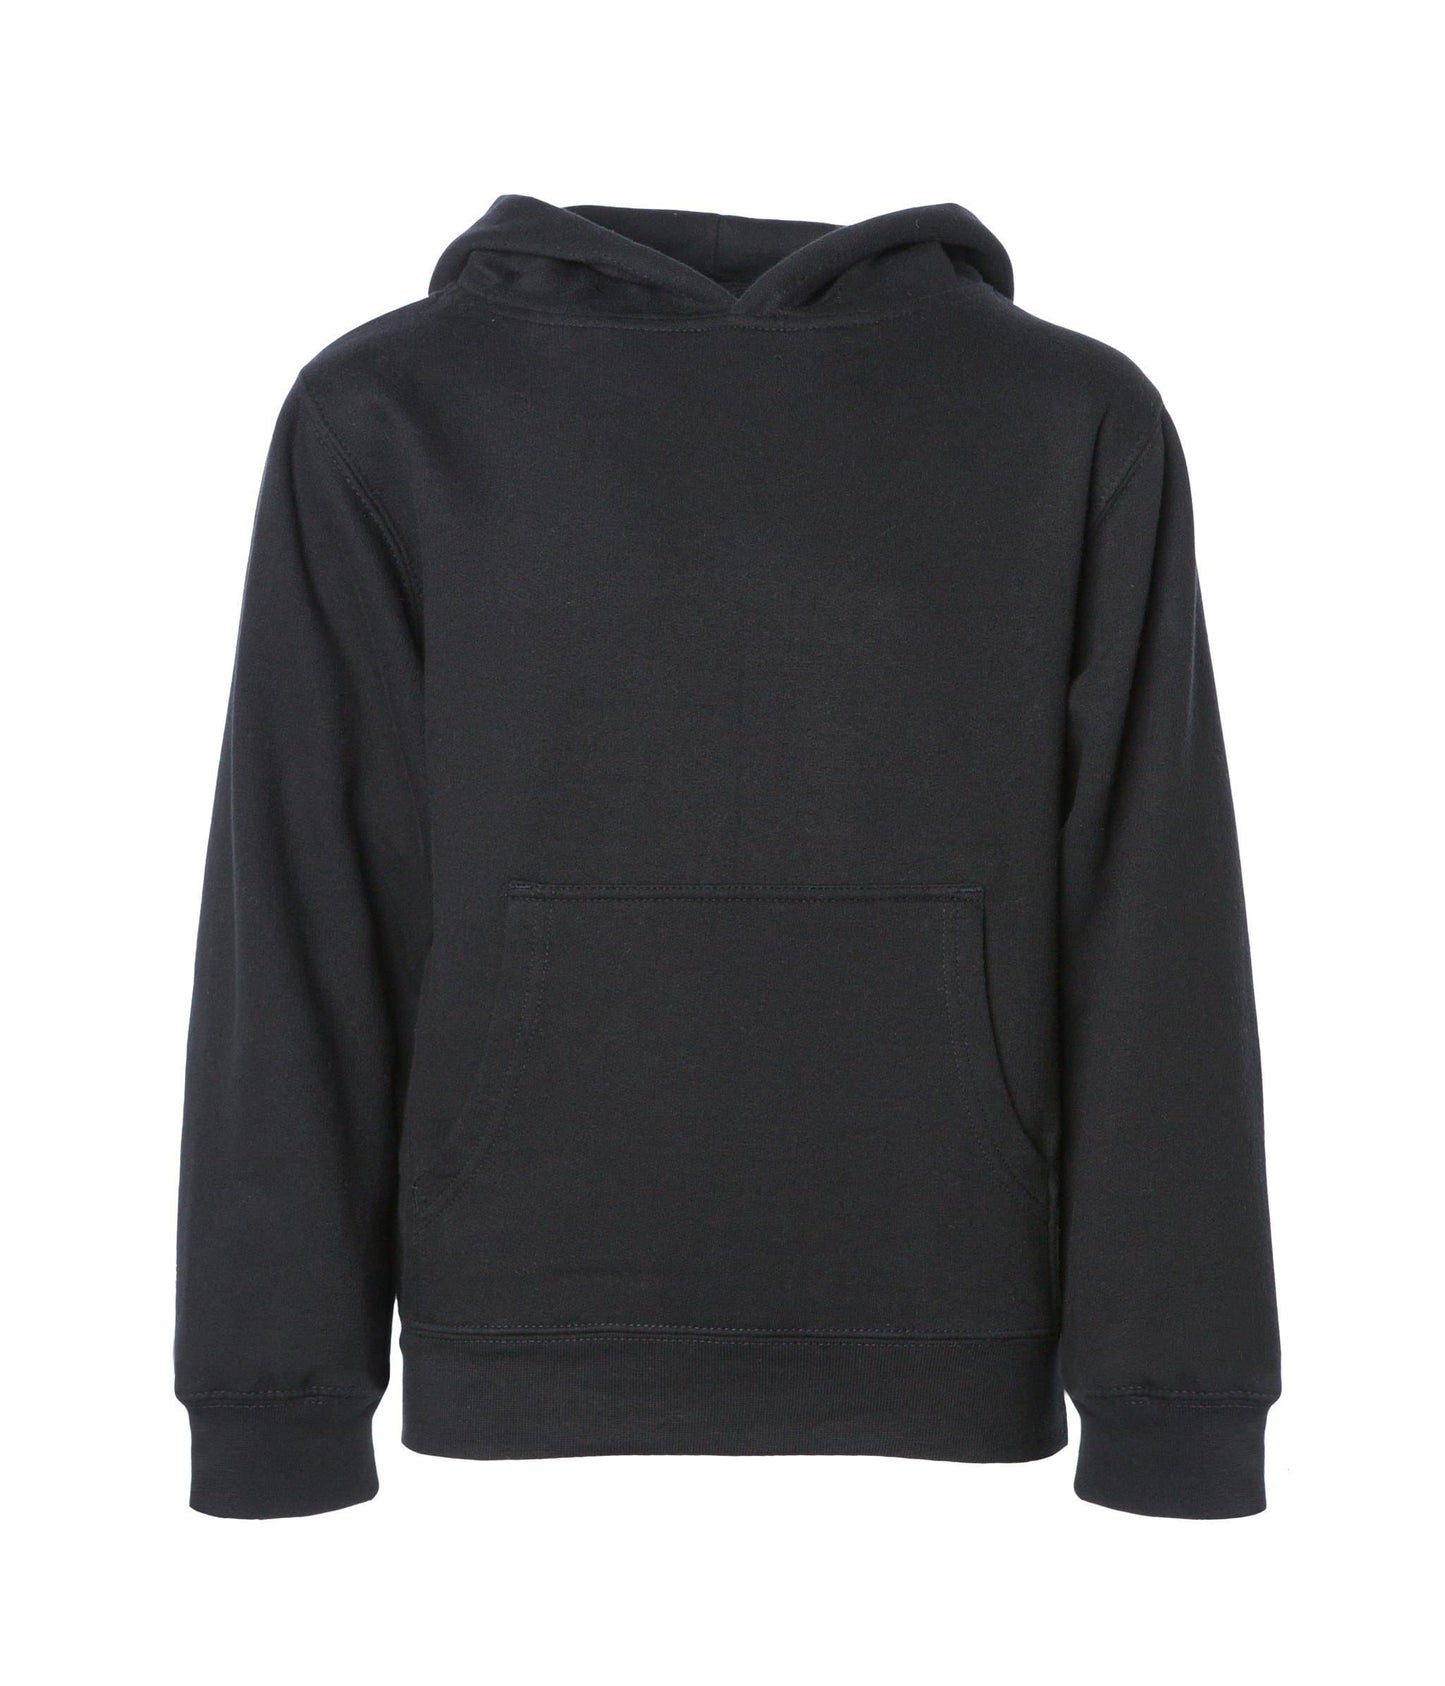 SS4001Y Youth Midweight Pullover Hooded Sweatshirt - Black